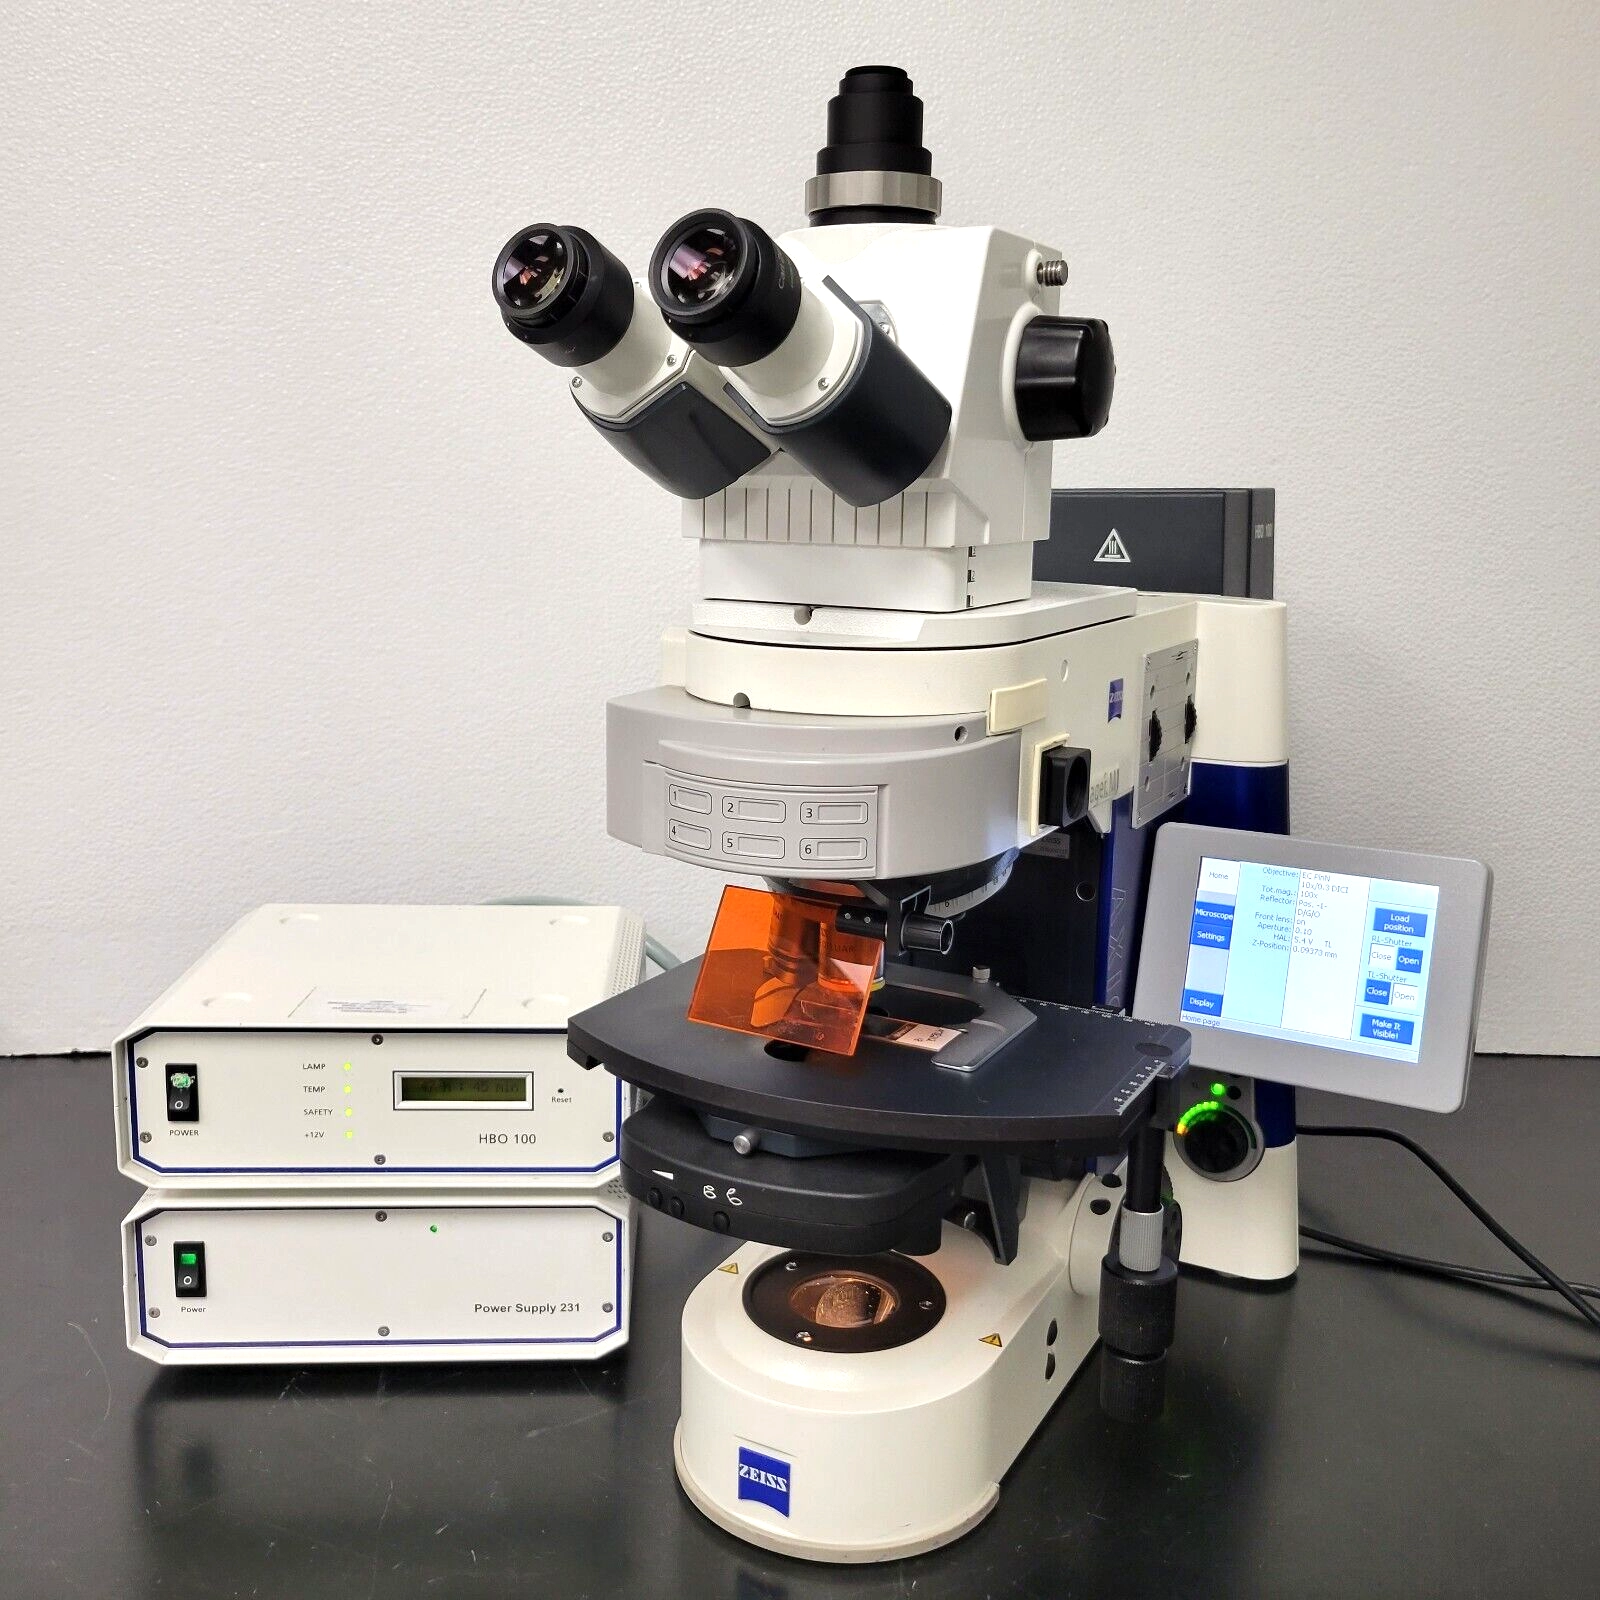 Zeiss Microscope Axio Imager.M1 Motorized with Fluorescence